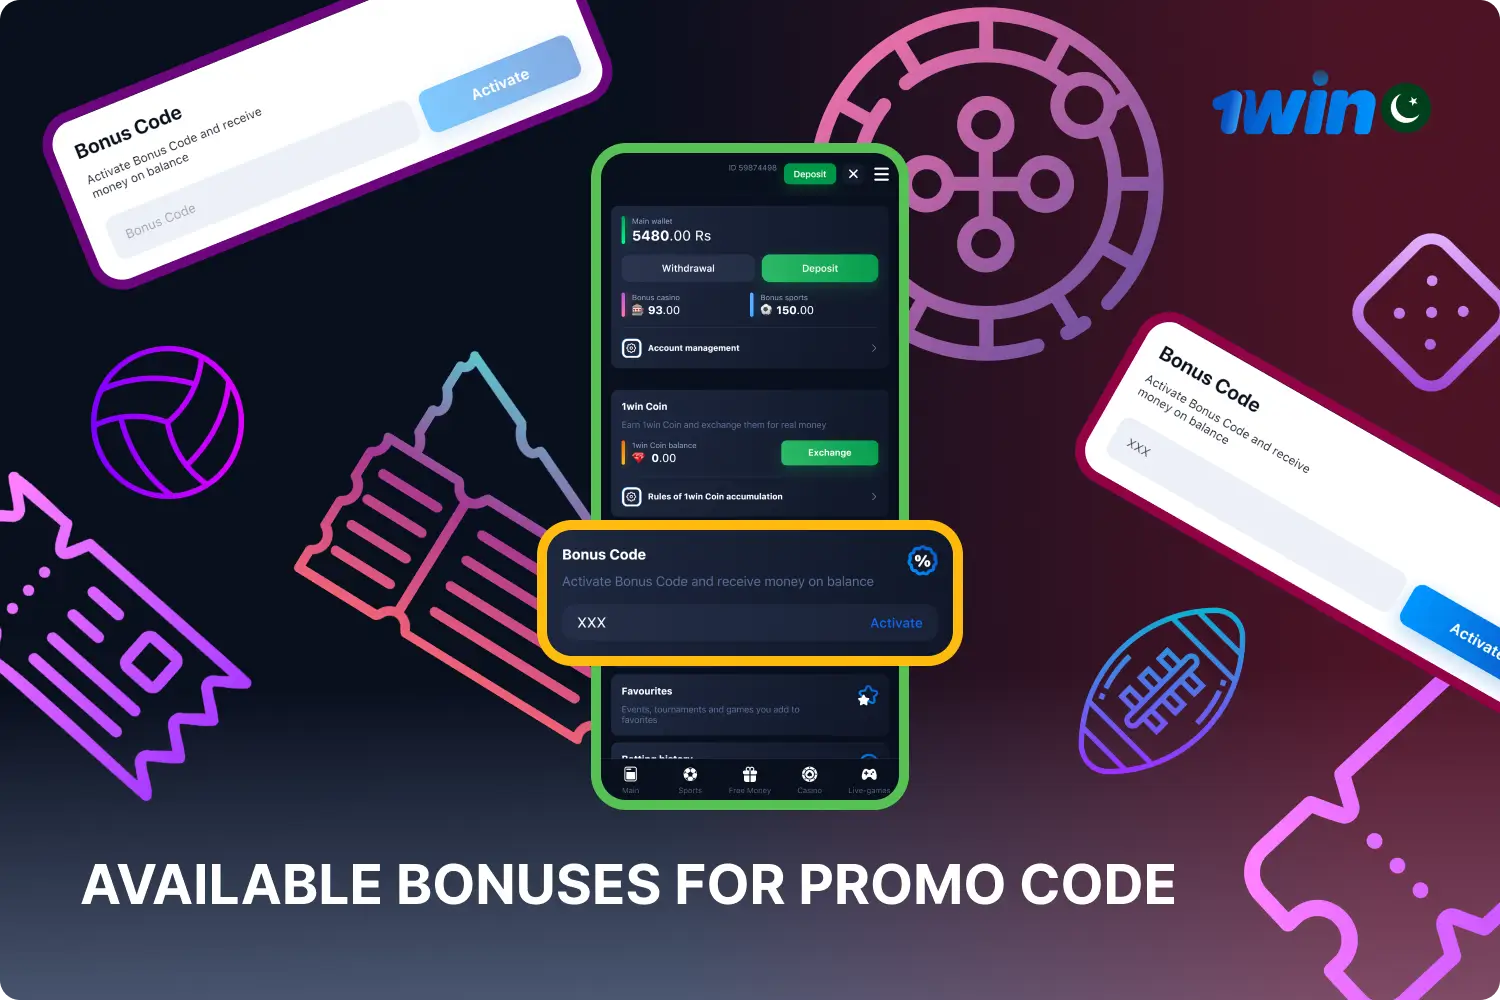 With the 1win promo code, players can access bonuses for sports betting or casino games of their choice